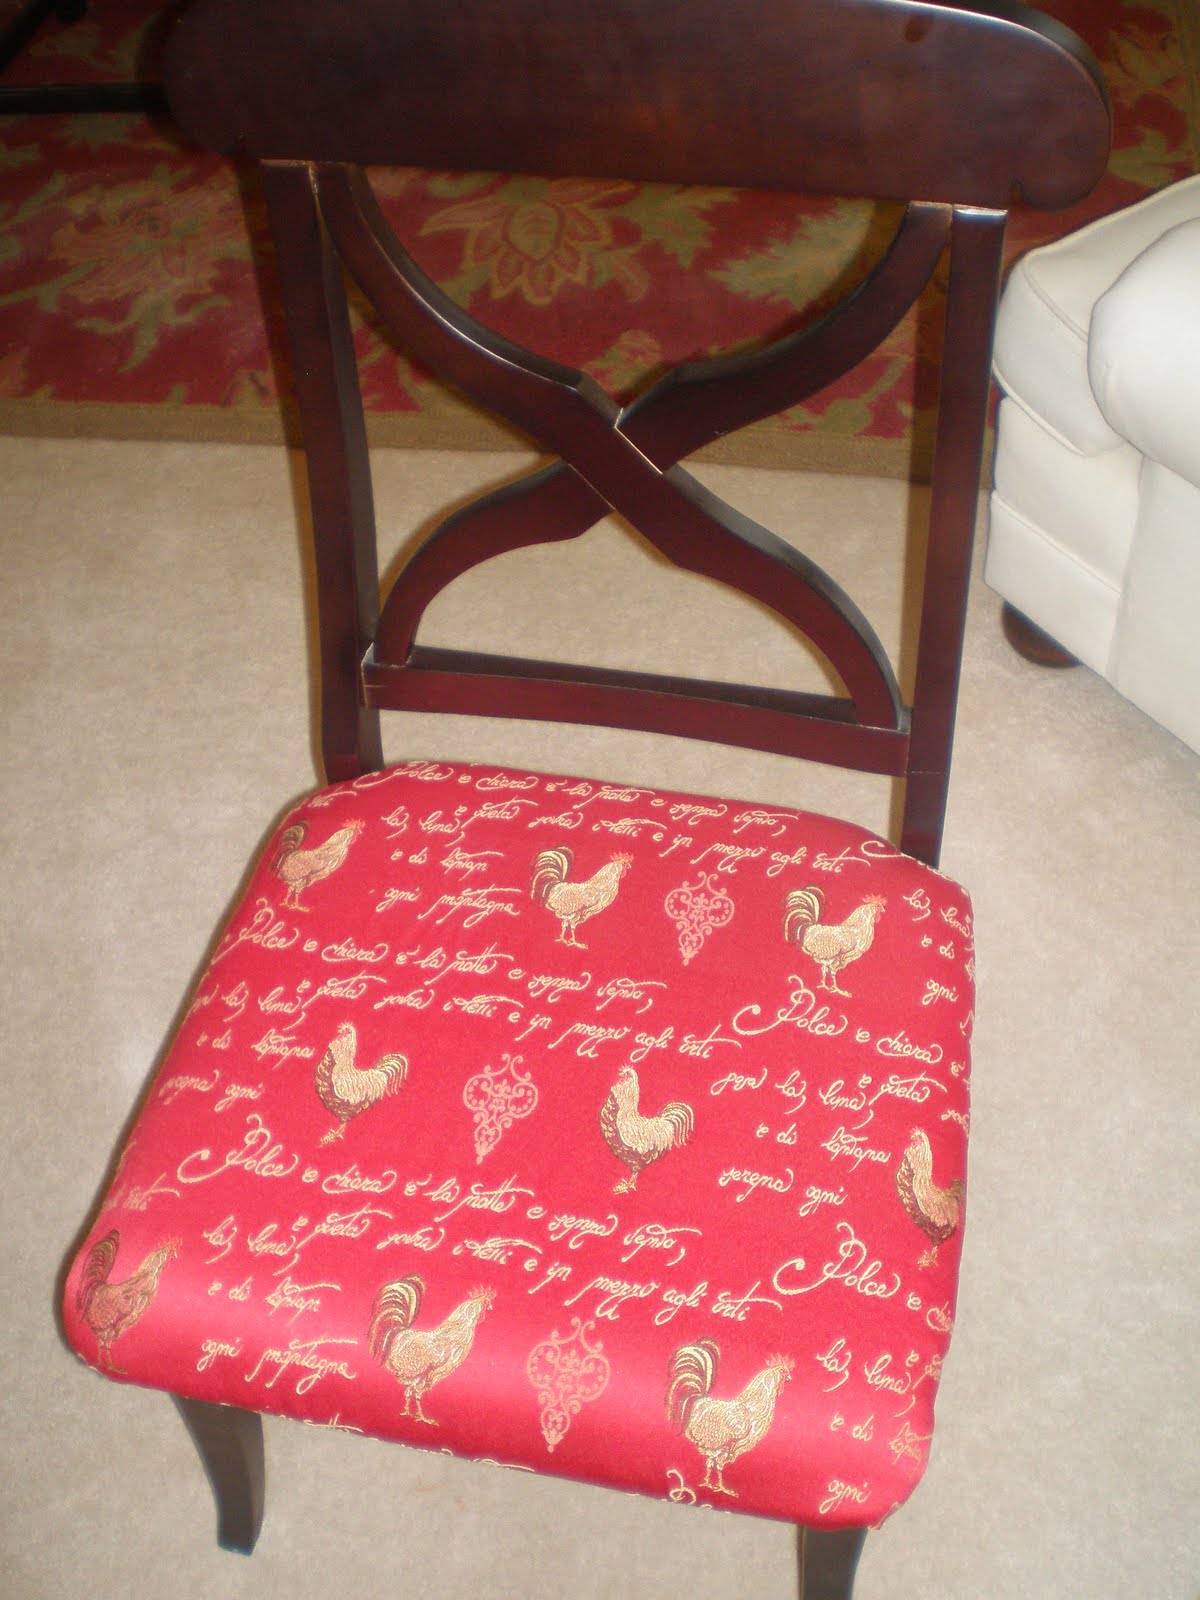 How to choose dining room chair seat covers?